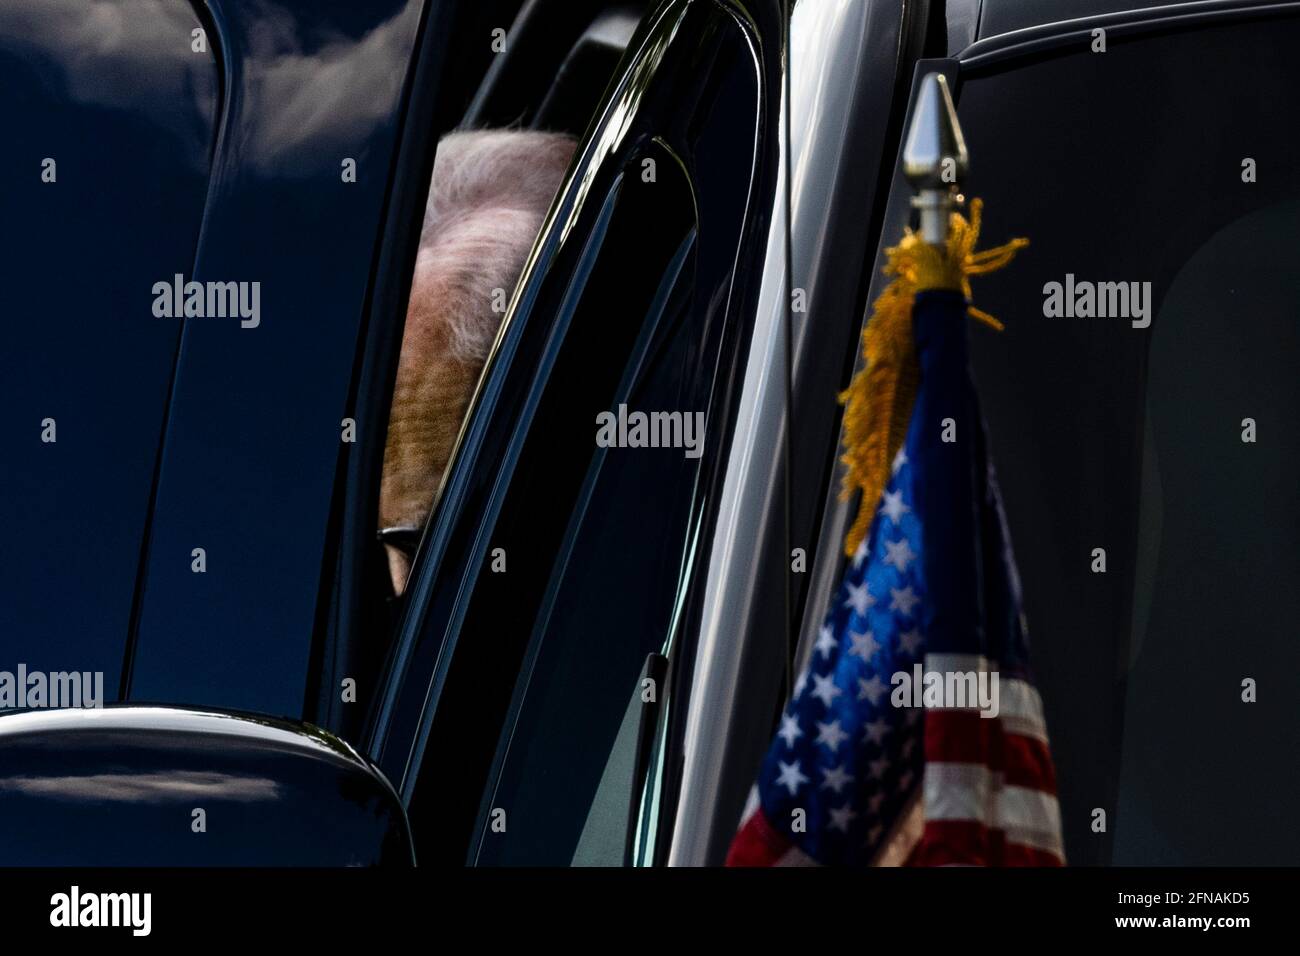 Washington, United States. 15th May, 2021. U.S. President Joe Biden boards Marine One on the Ellipse near the White House in Washington, DC, U.S., on Saturday, May 15, 2021. Biden rescinded several executive actions on Friday that were put in place by Donald Trump, including one targeting social media companies that his predecessor had ordered after Twitter fact-checked his tweets. Photographer: Samuel Corum/Pool/Sipa USA Credit: Sipa USA/Alamy Live News Stock Photo